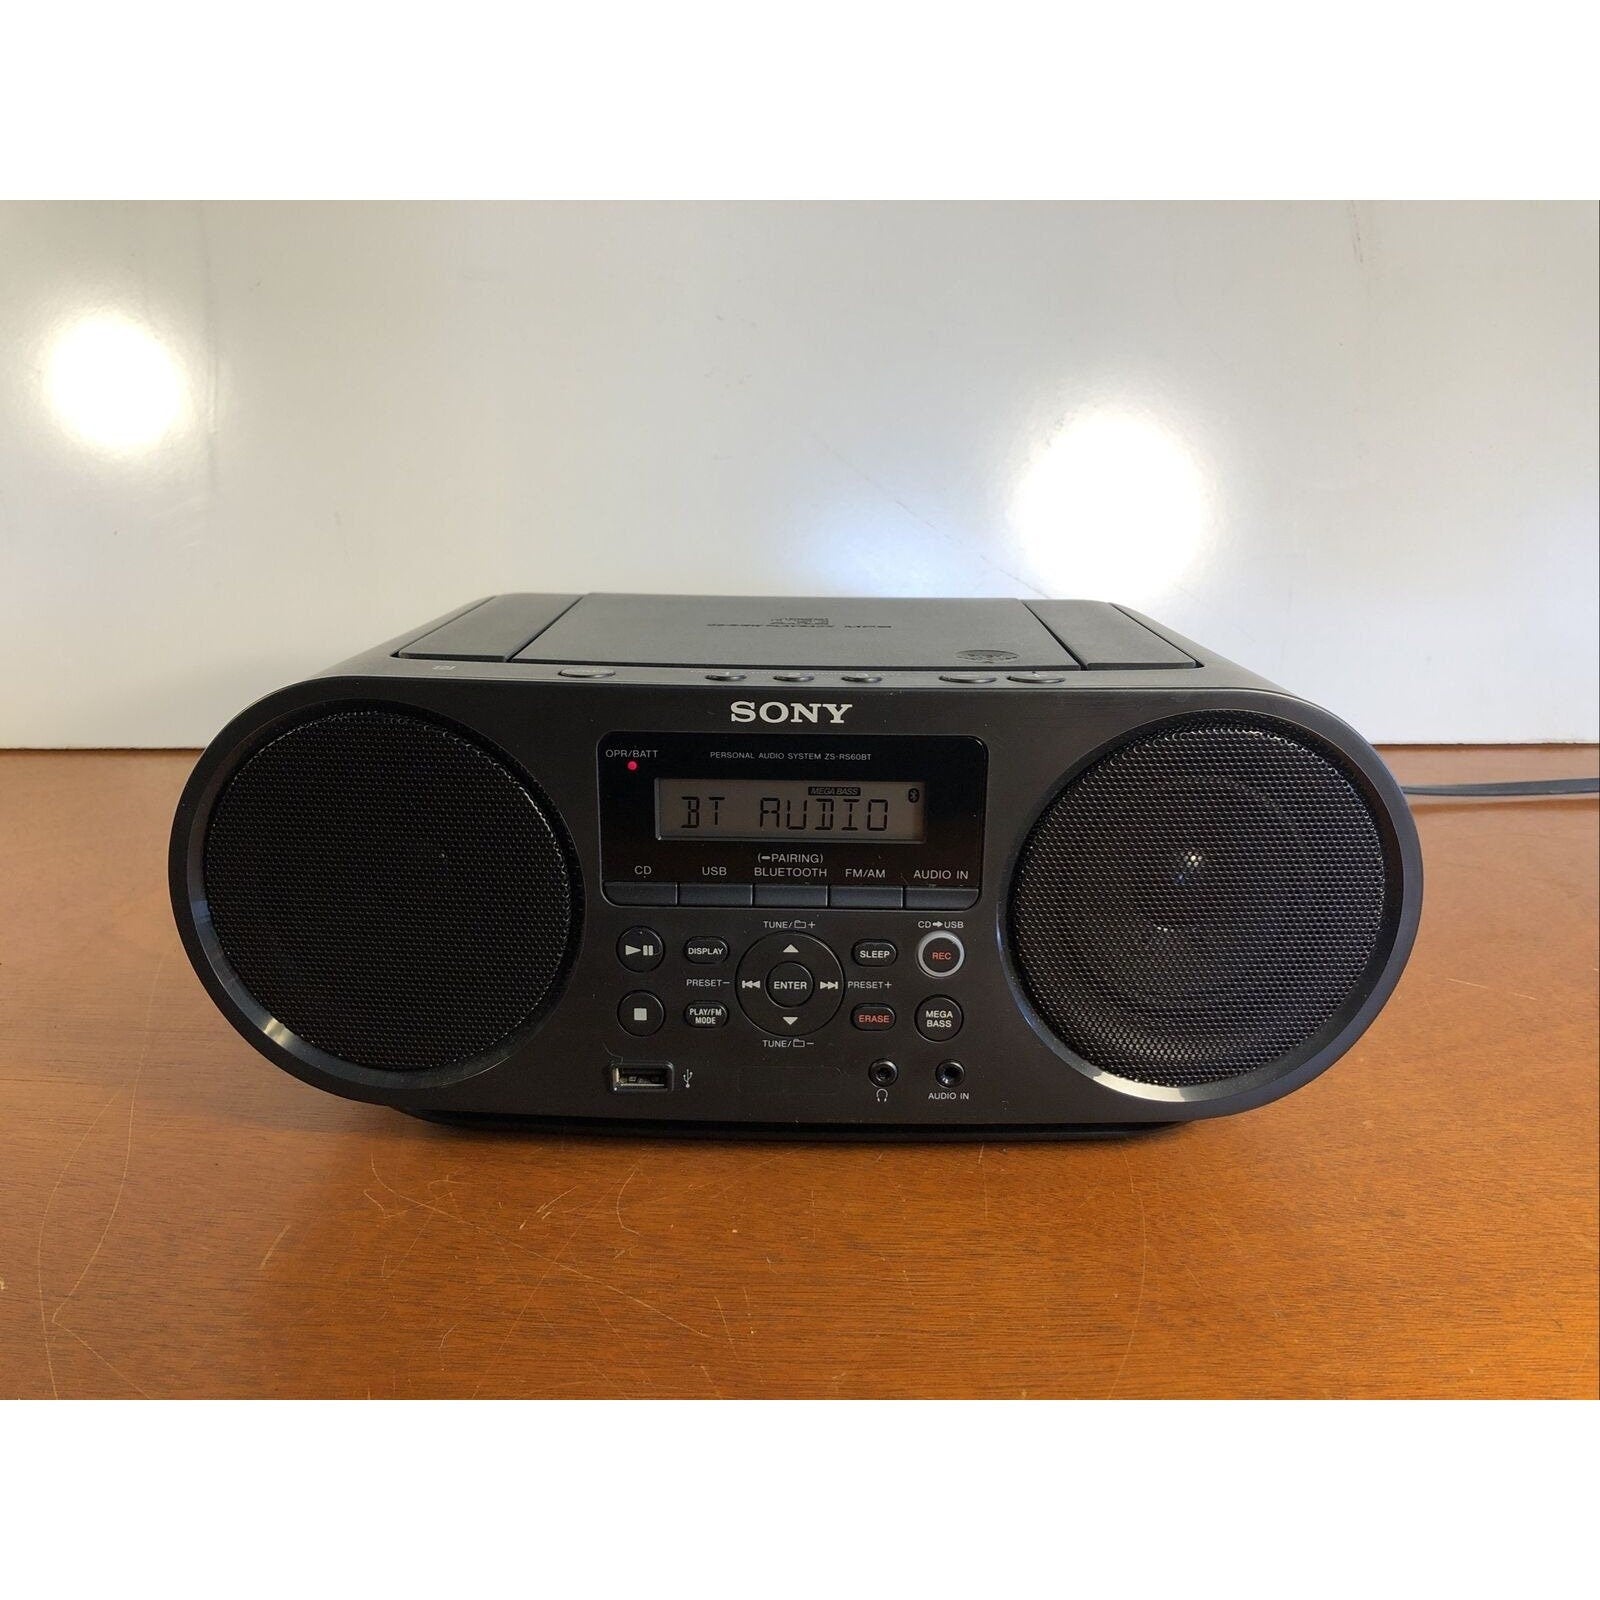 Sony ZS-Rs60bt CD Boomboxes w/ Bluetooth/Nfc am/fm USB Headset+Line-in Jacks